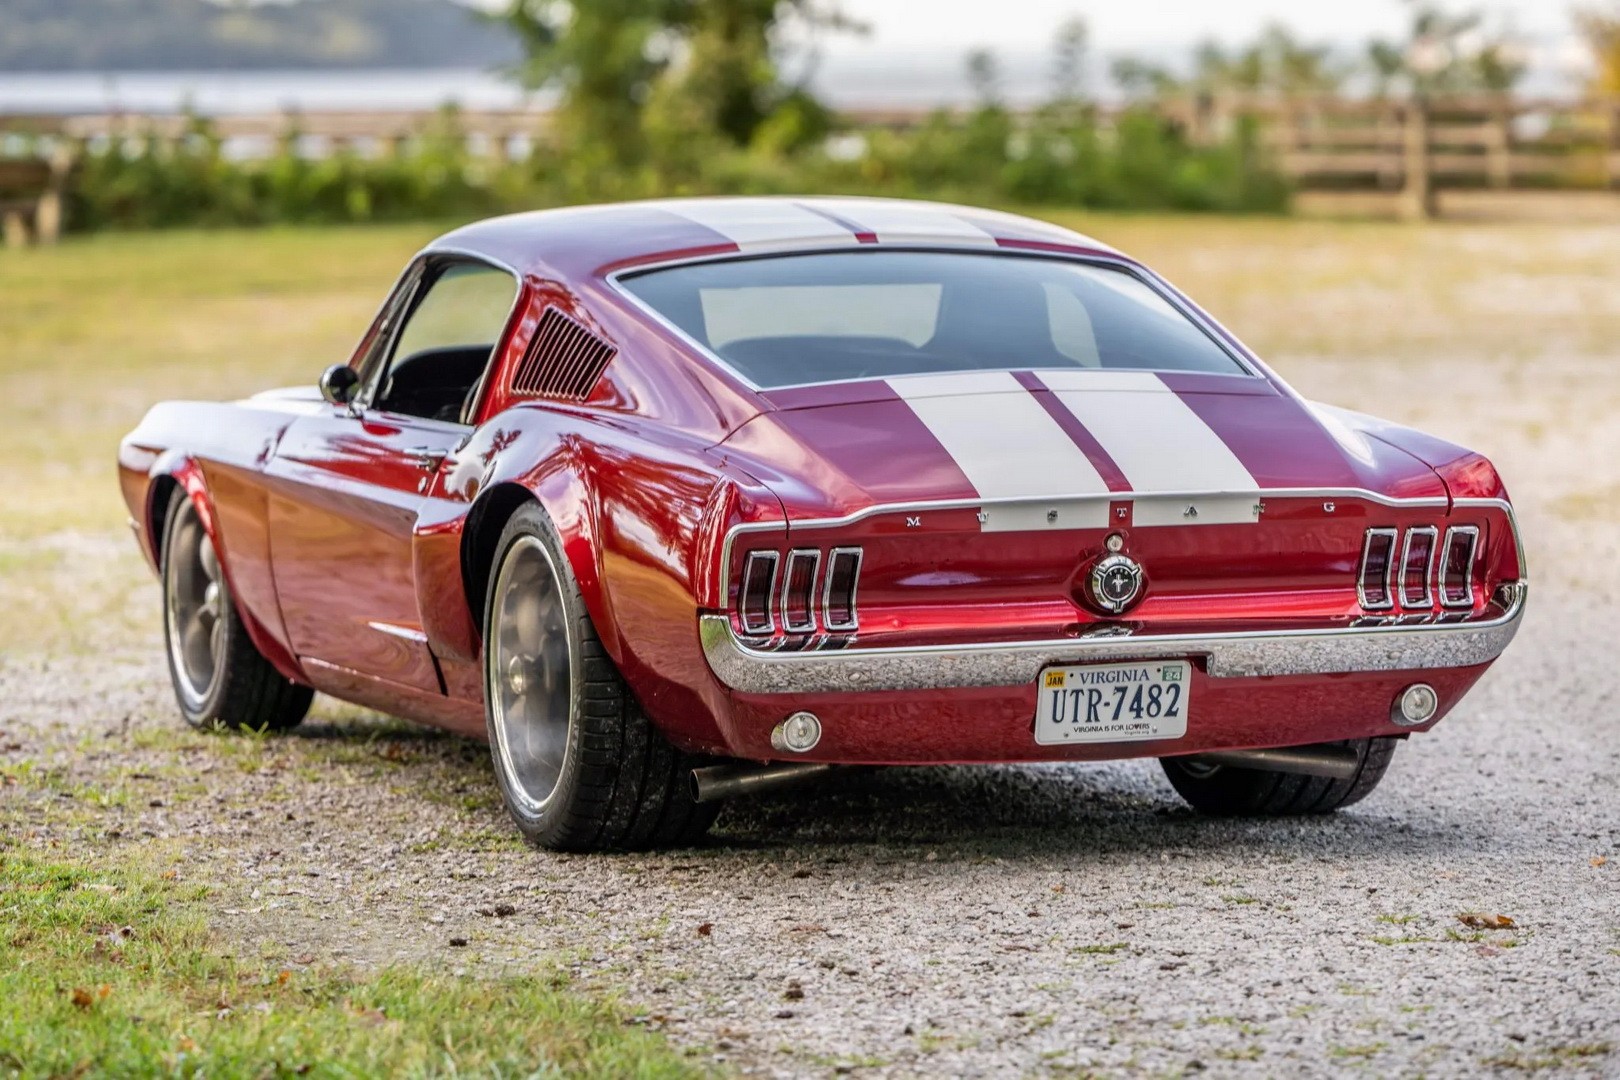 One-of-a-Kind 1967 Ford Mustang Looks Like an Aston Martin V8 Vantage ...